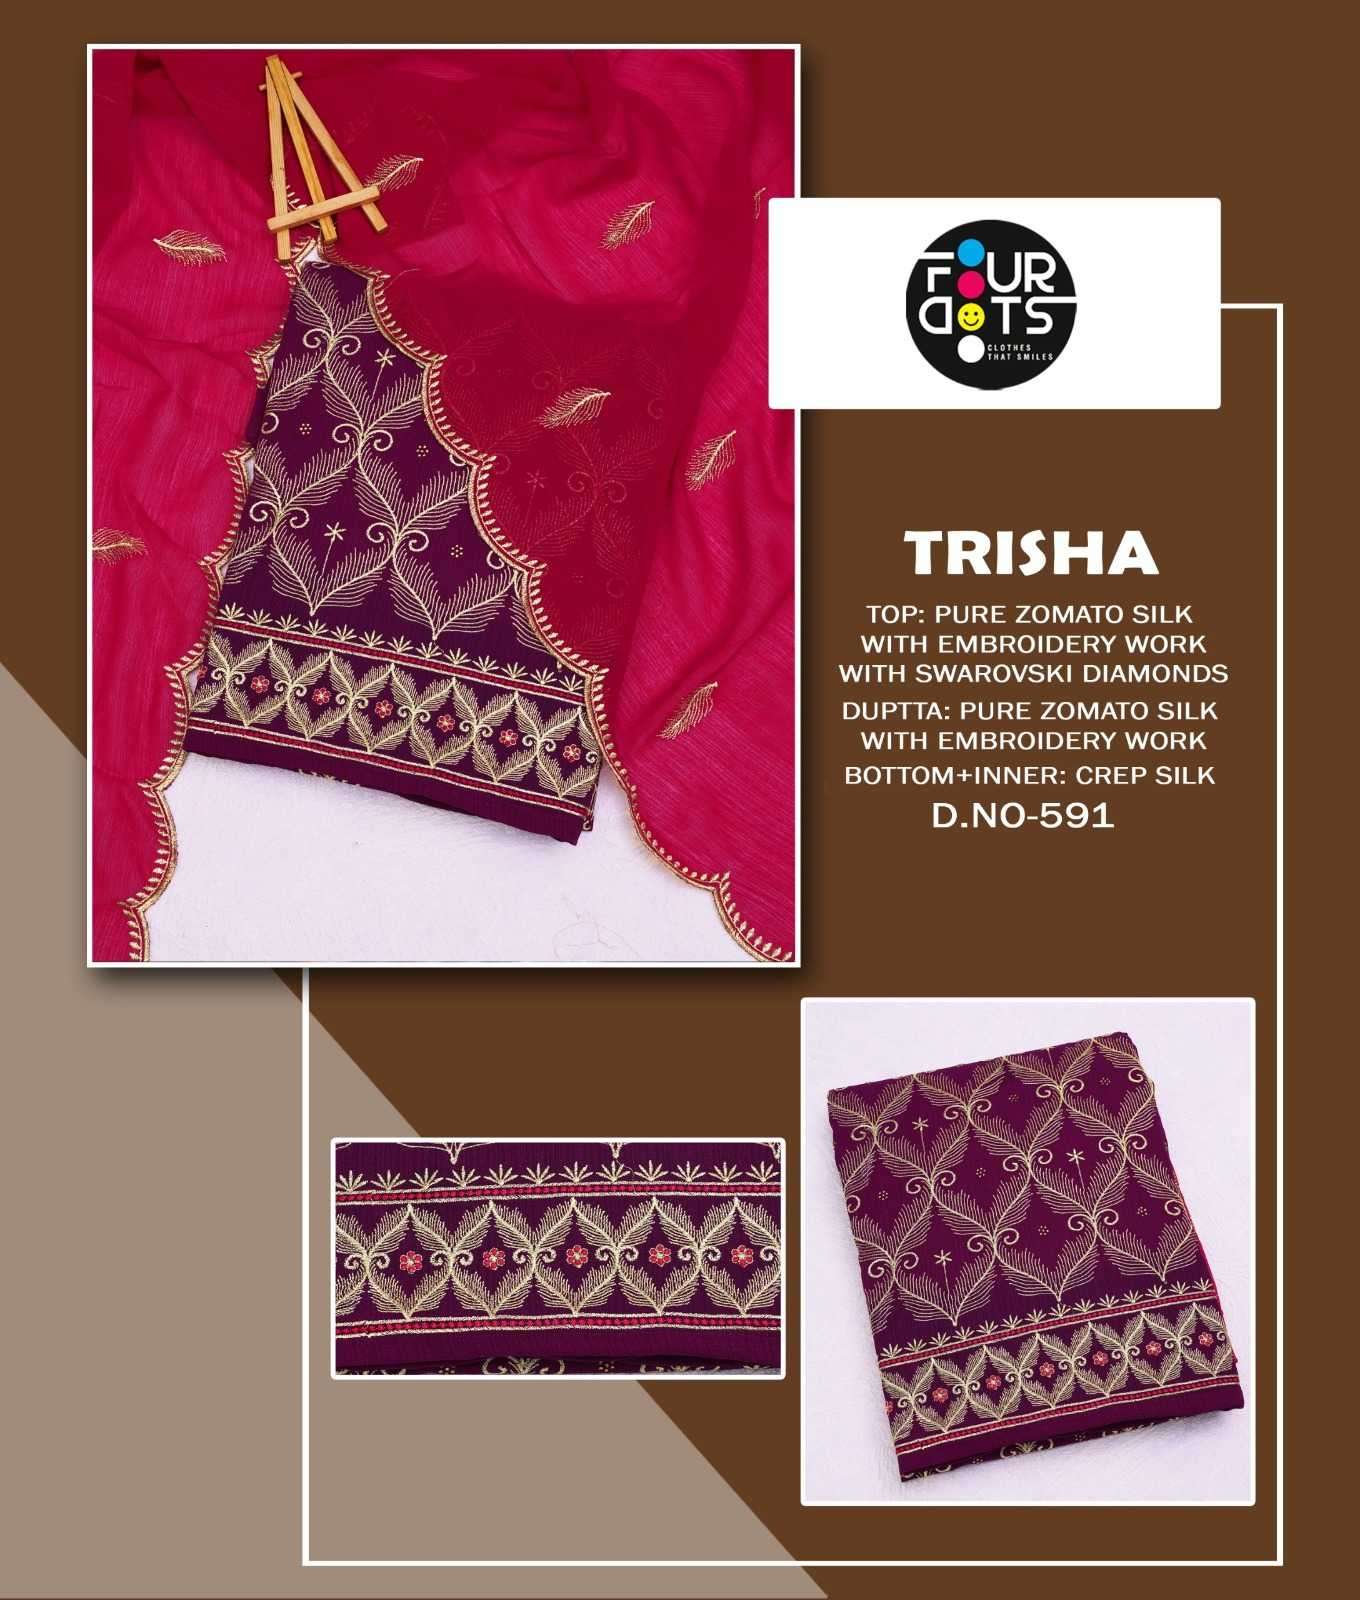 fourdots trisha Pure Zomato Silk With Embroidery Work suit